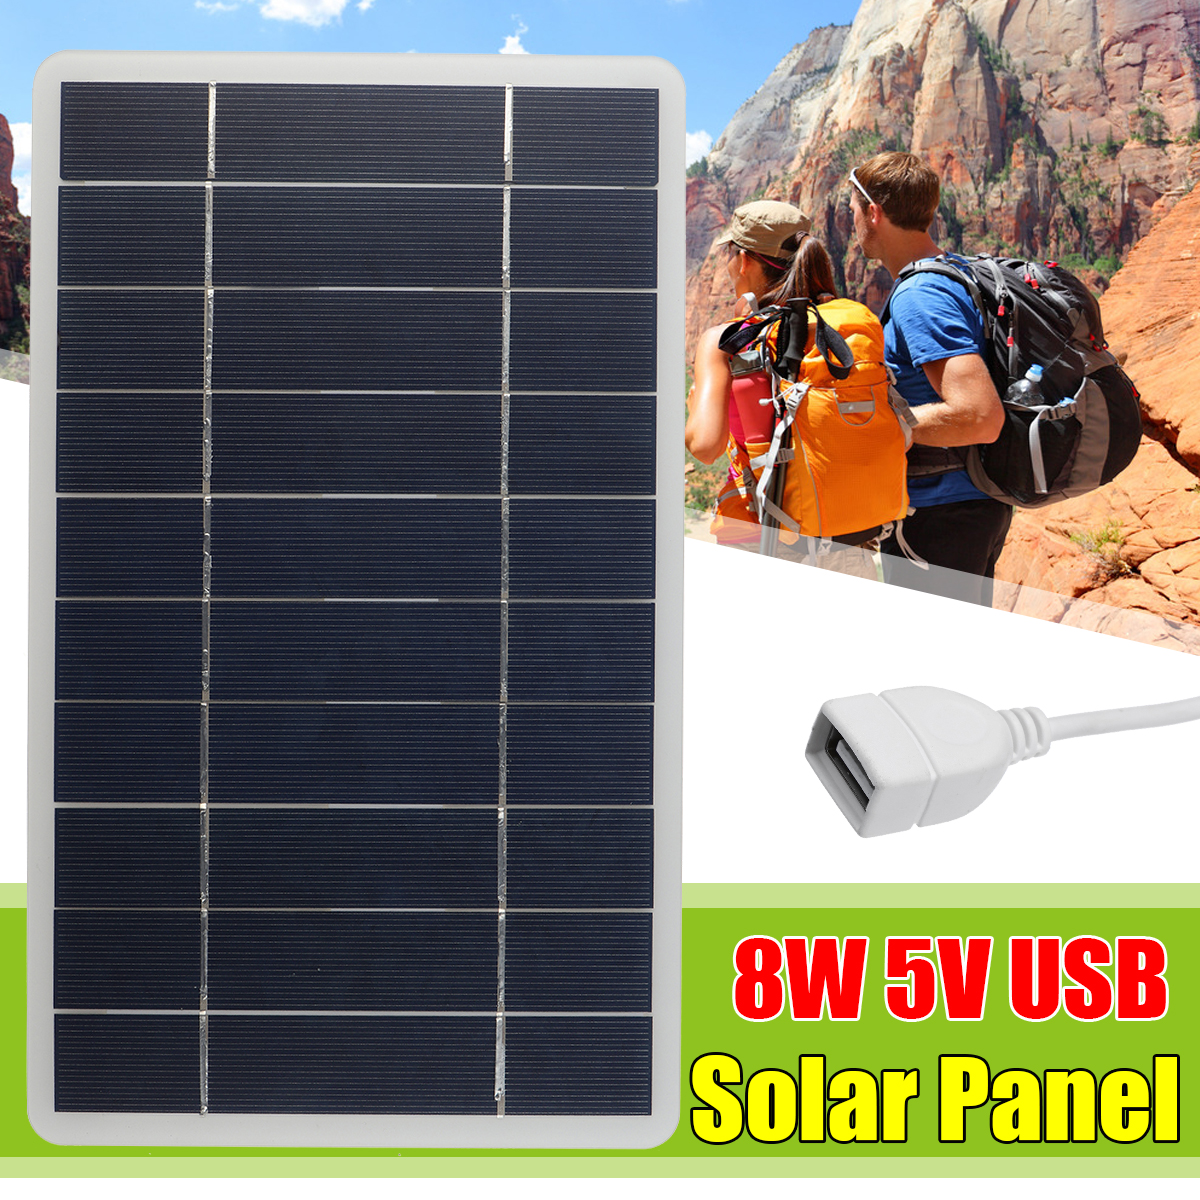 8W-5V-USB-Monocrystalline-Silicon-Solar-Panel-Phone-Car-USB-Battery-Outdoor-Charger-1873505-1